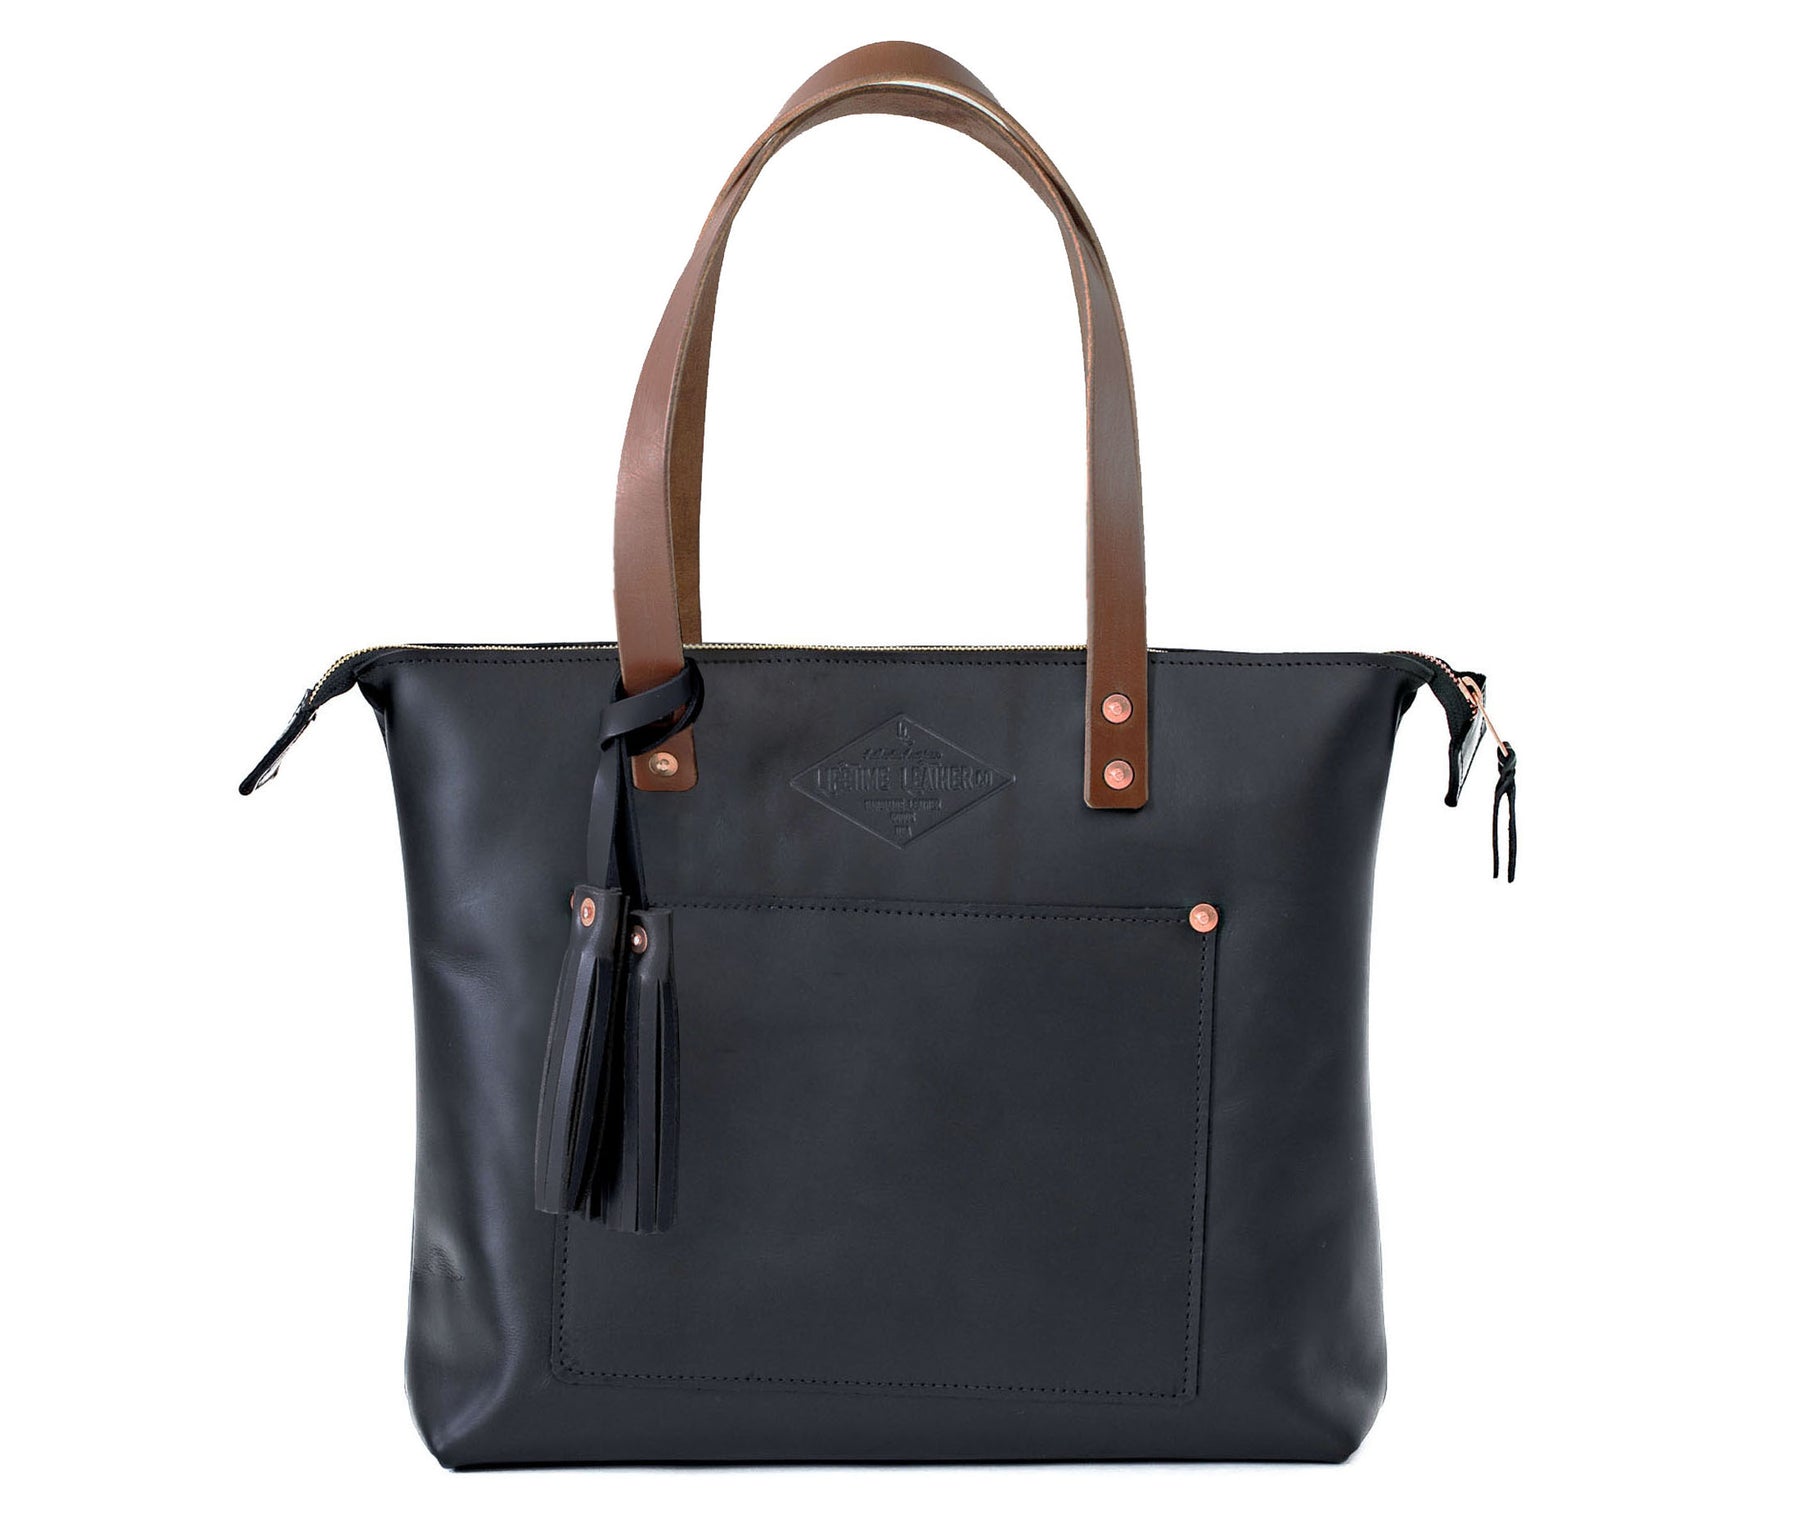 Lifetime Leather Zippered Tote Bag